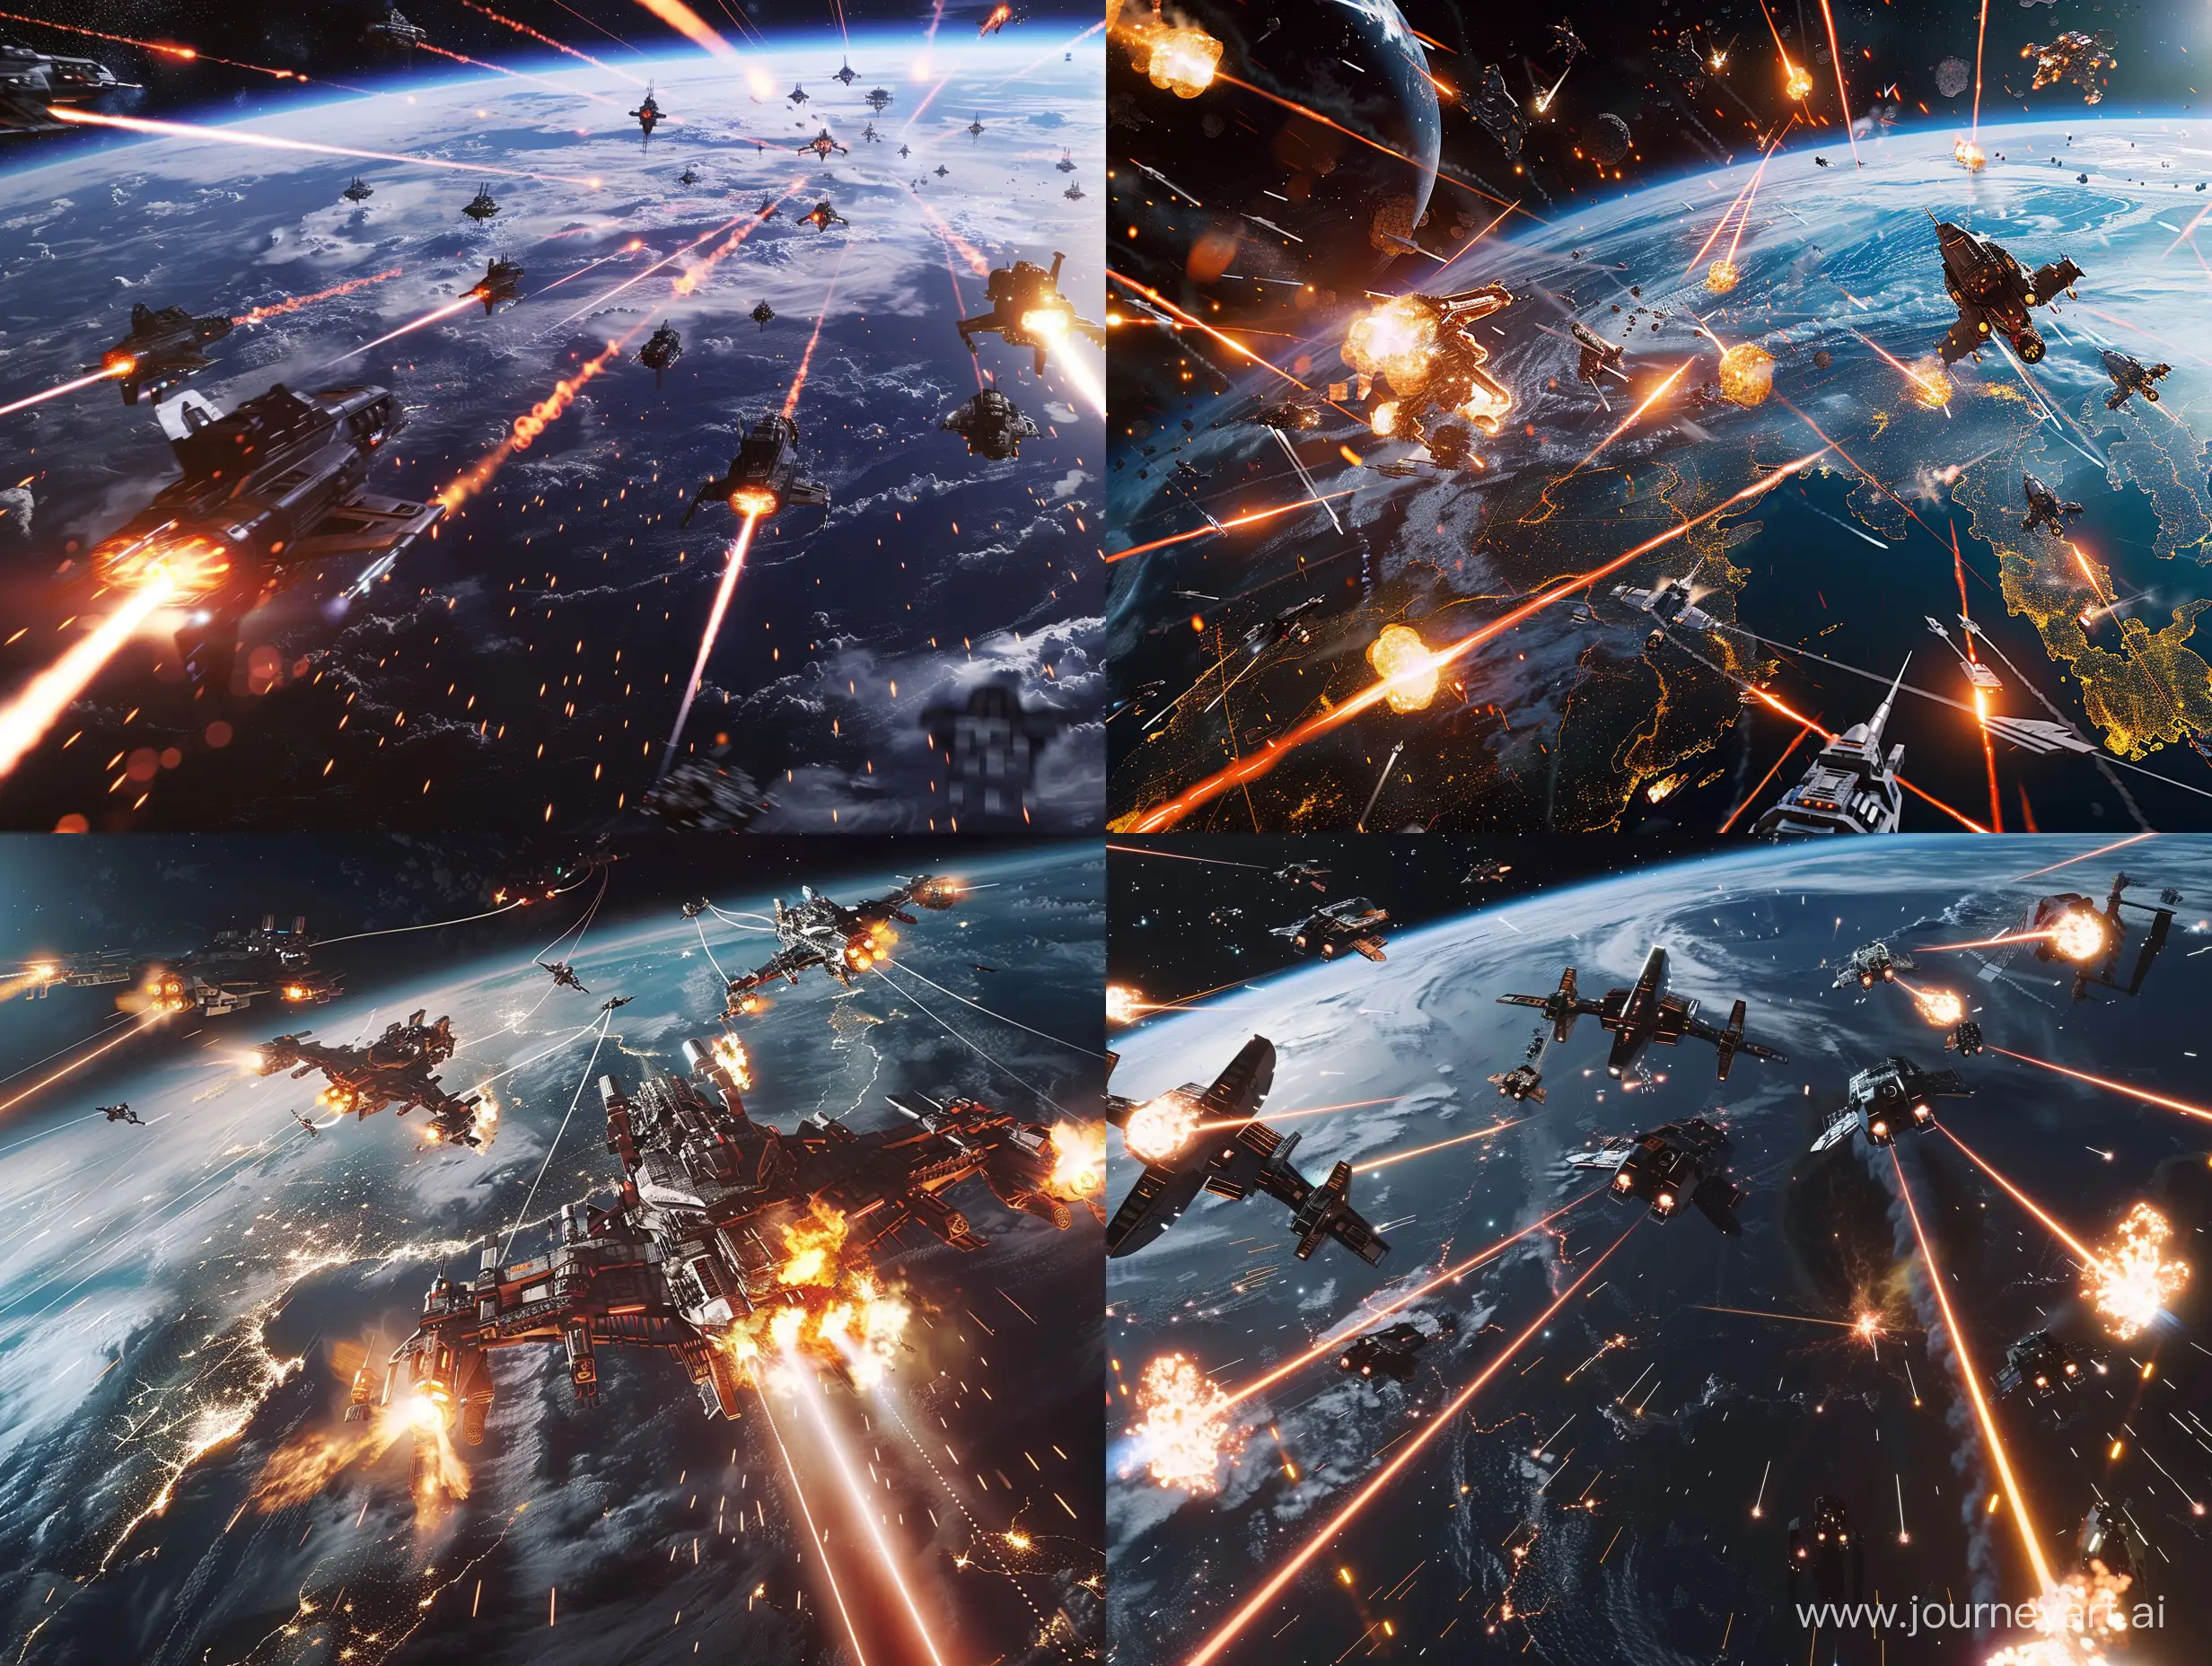 space, earth's lower view, multiple spaceships fighting other spaceships, lasers,fire,explosions,shockwaves, cinematic, 8k, wide angle, 